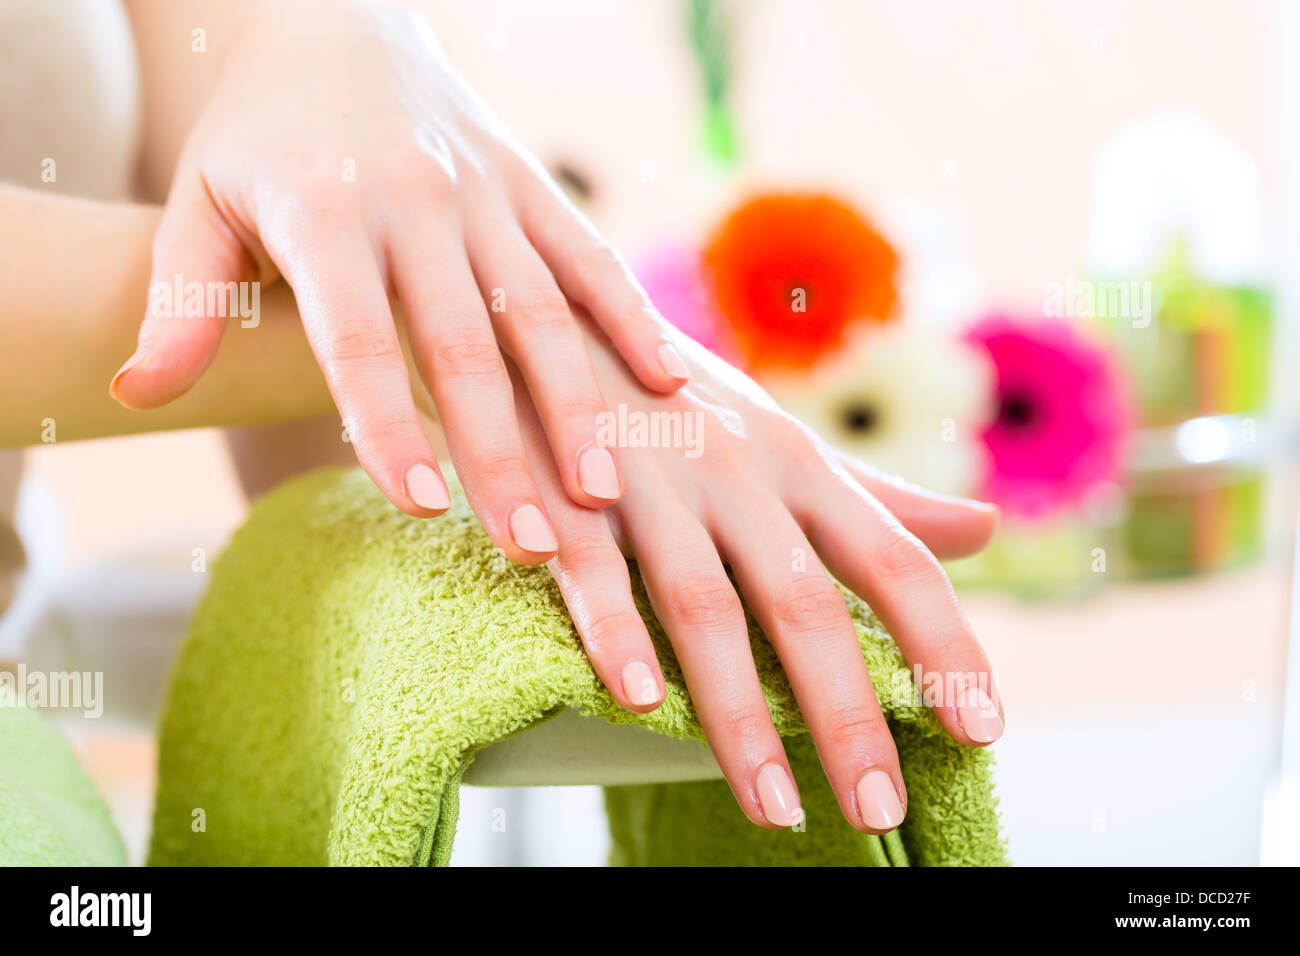 Woman in a nail salon receiving a manicure by a beautician, symbol picture with hands Stock Photo